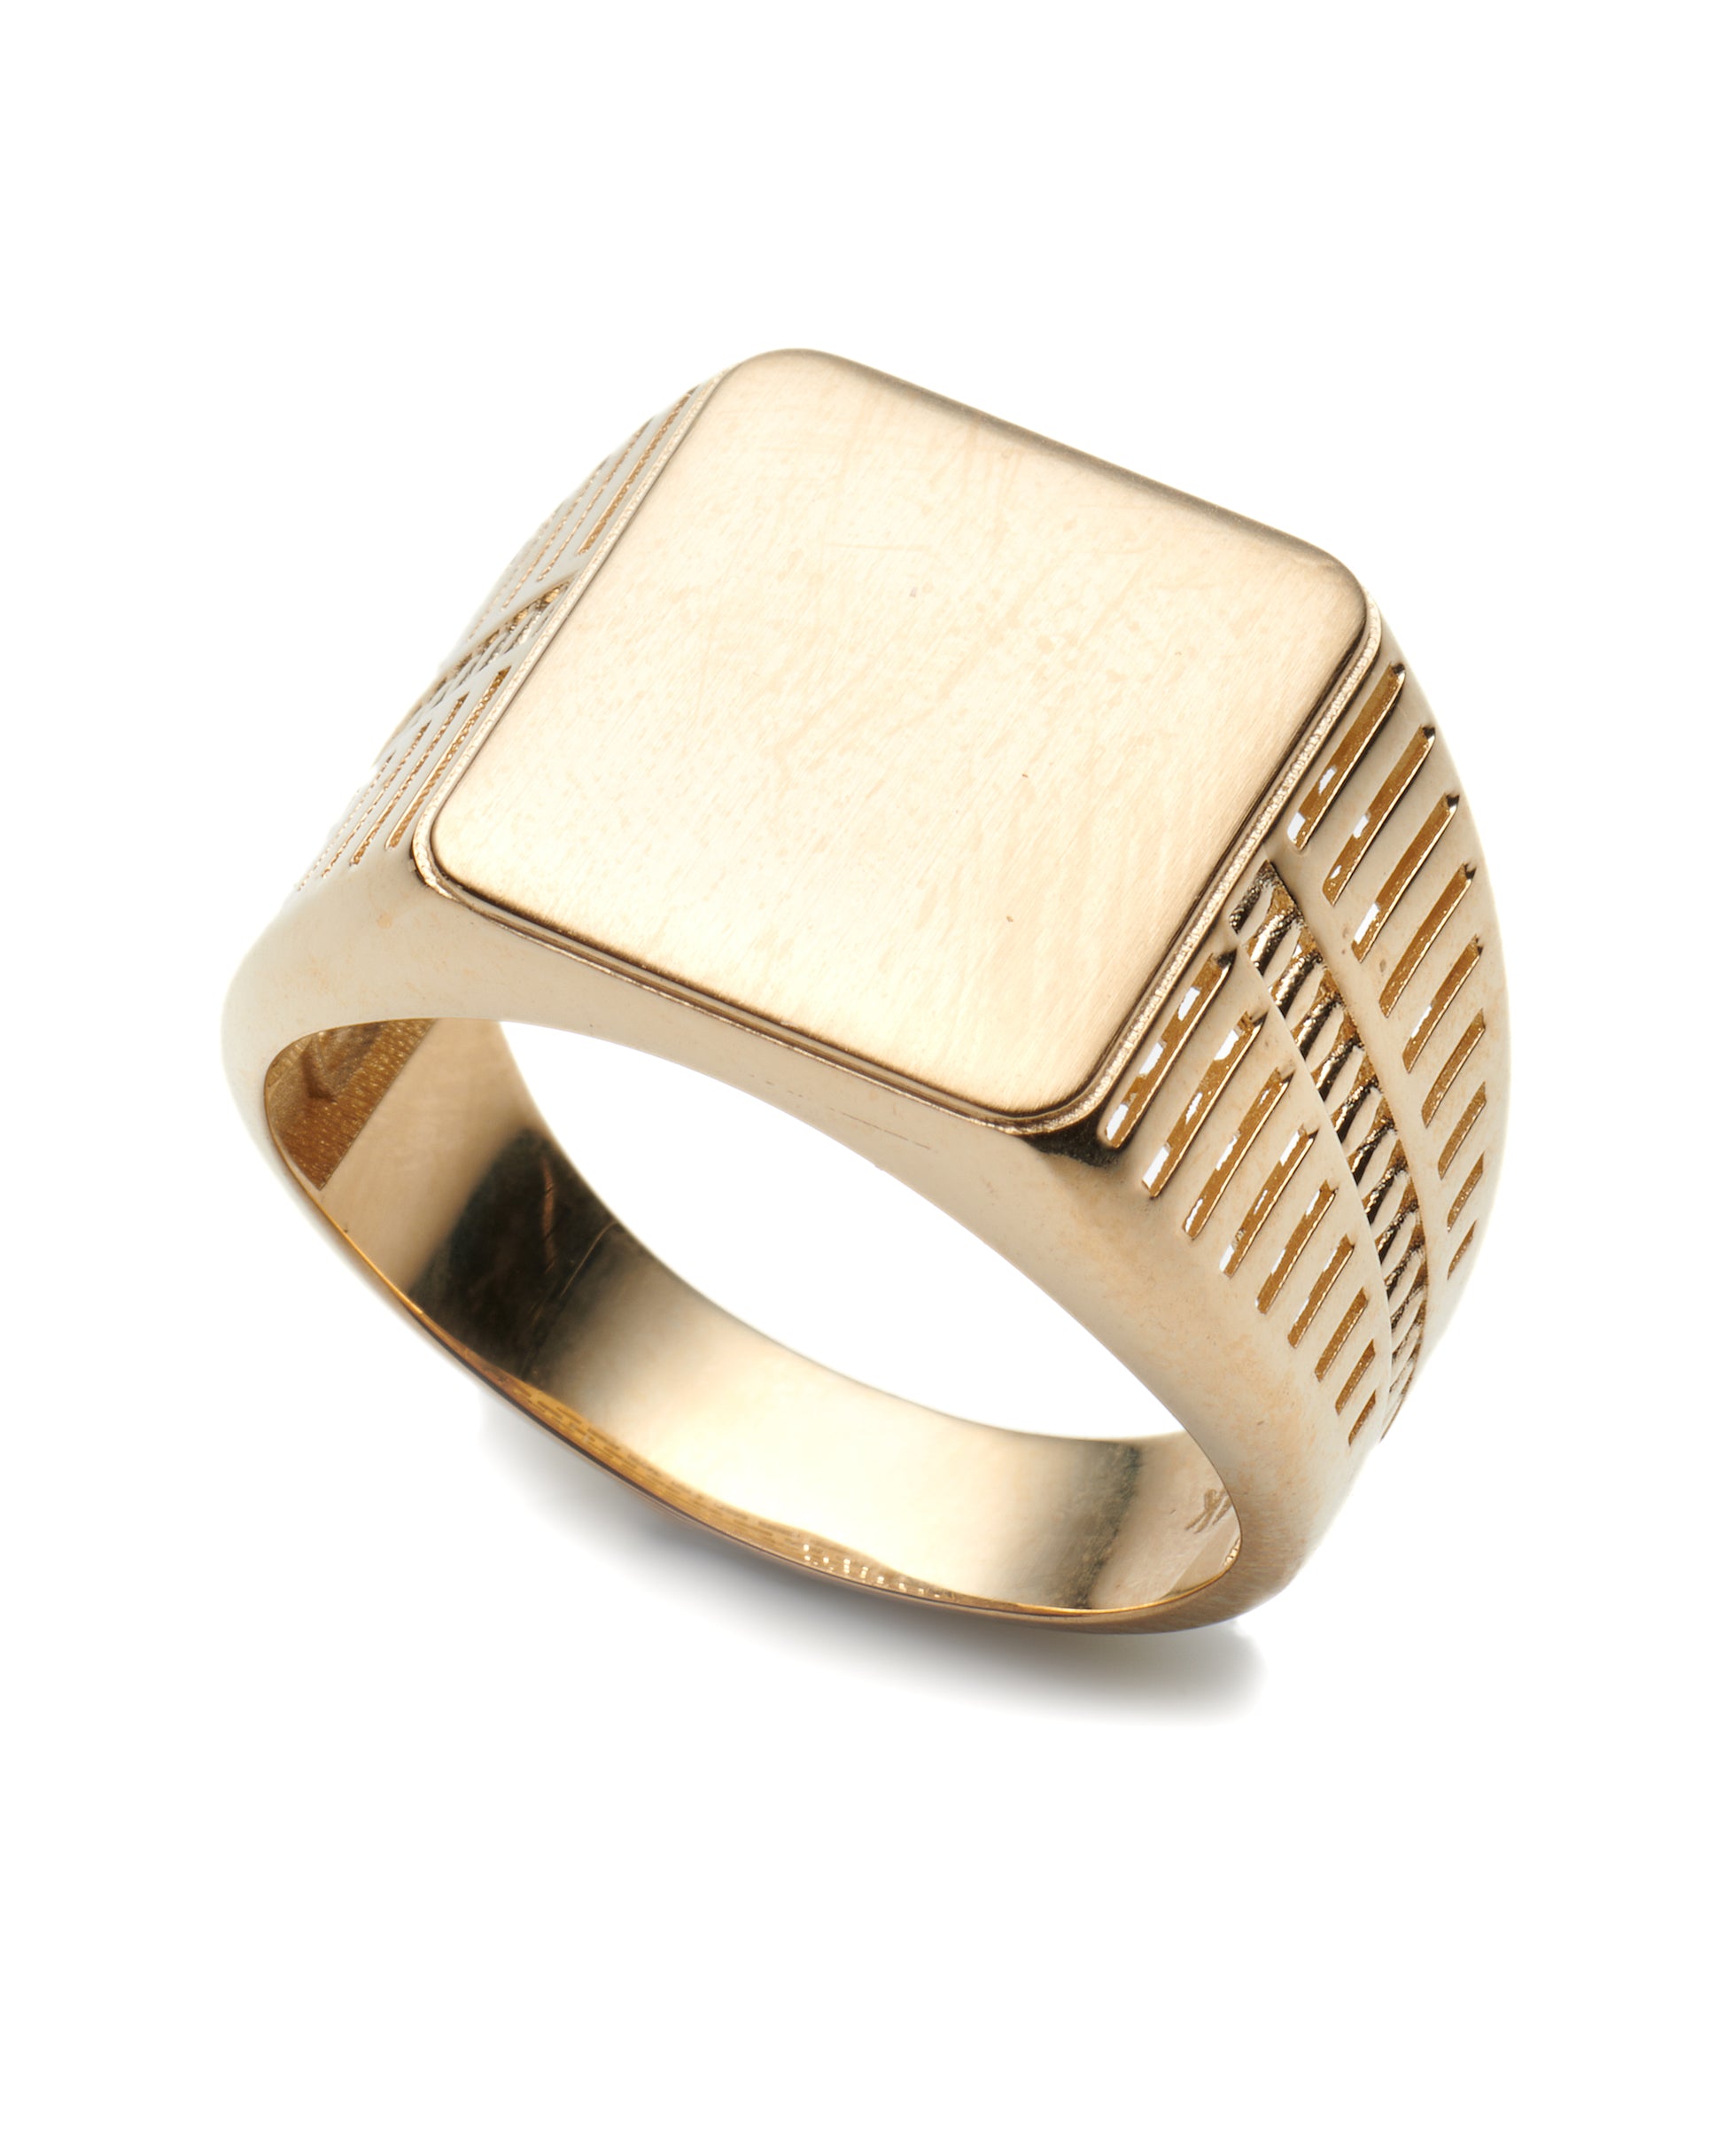 14K Yellow Gold Mens Square Signet Ring Size 11 4.4Dwt